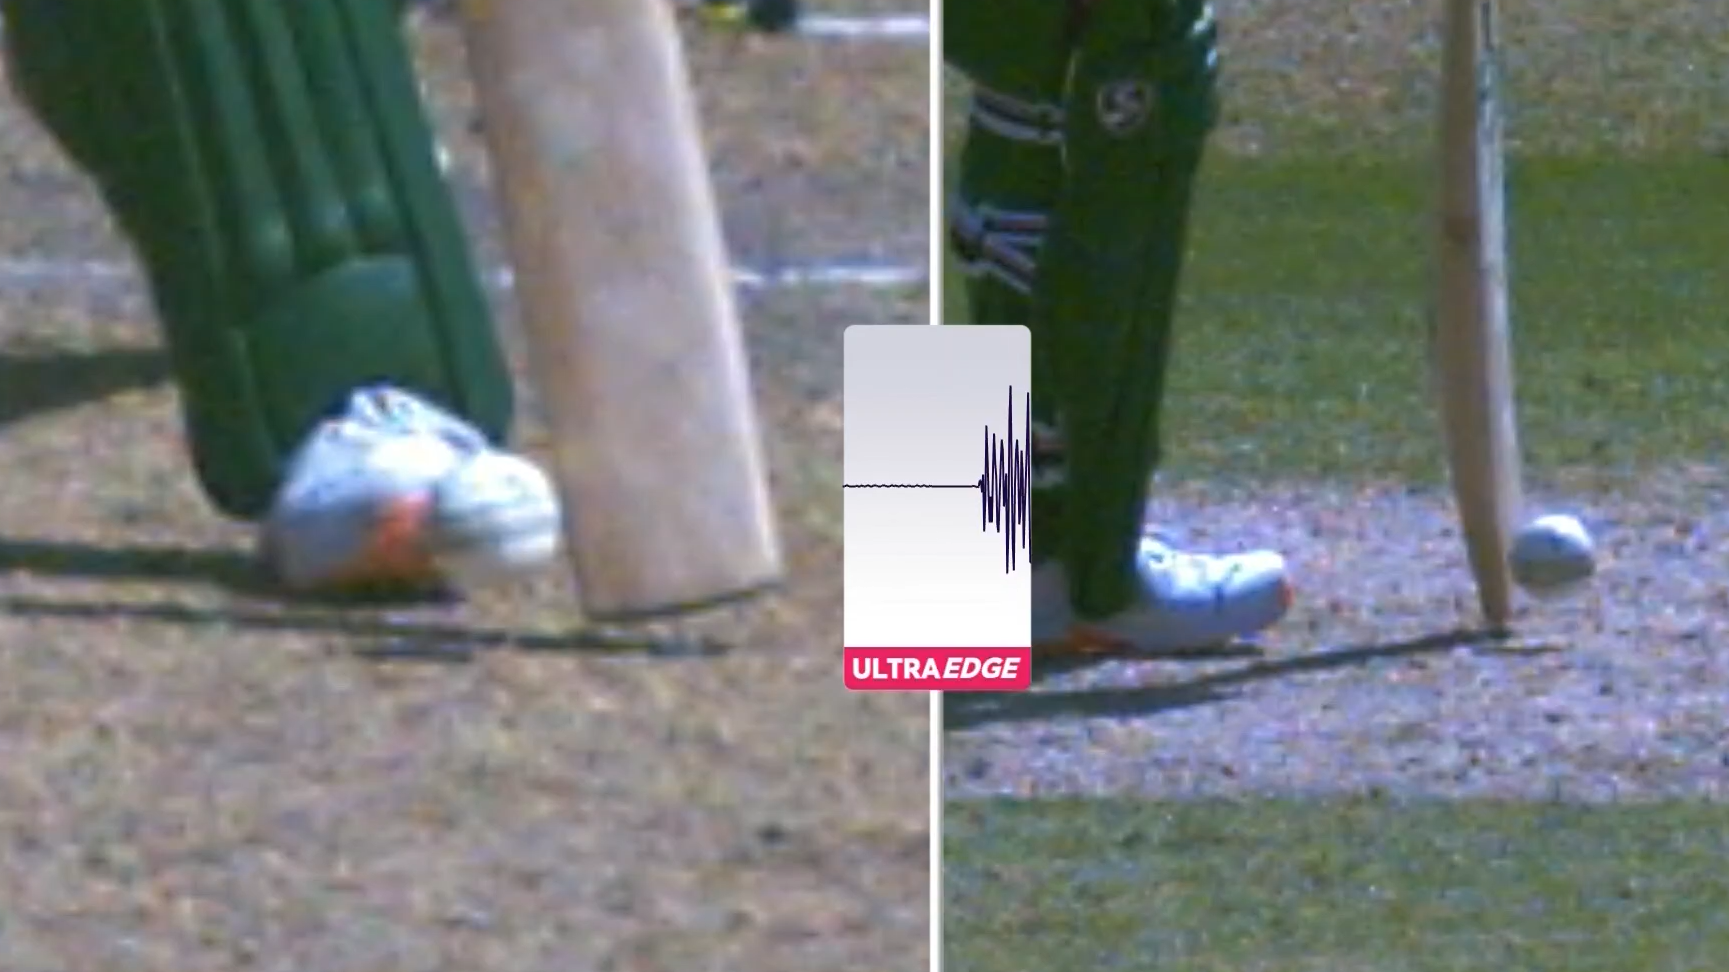 The moment the television umpire determined the spike originated from the bat hitting the ground.